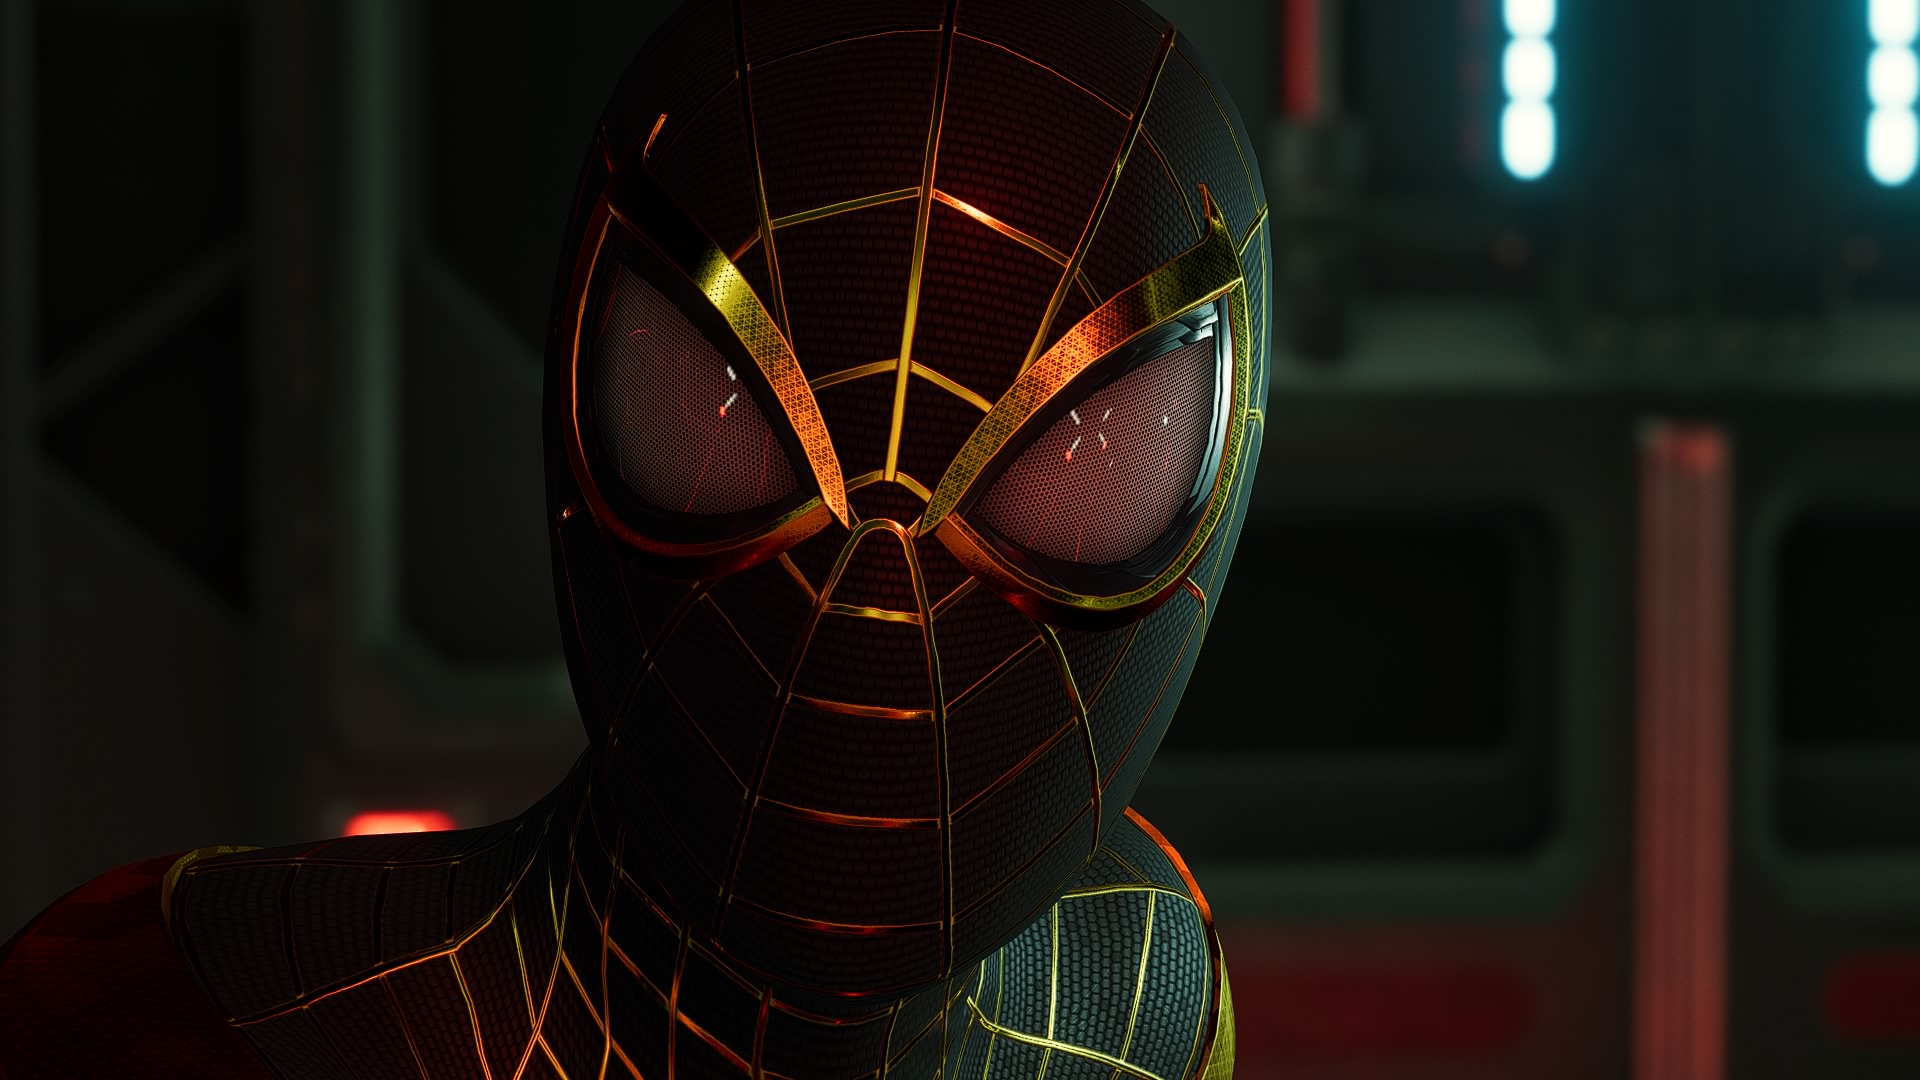 Miles Morales Spider Man Video Games PlayStation 4 Screen Shot Marvel Super Heroes Fictional Charact 1920x1080